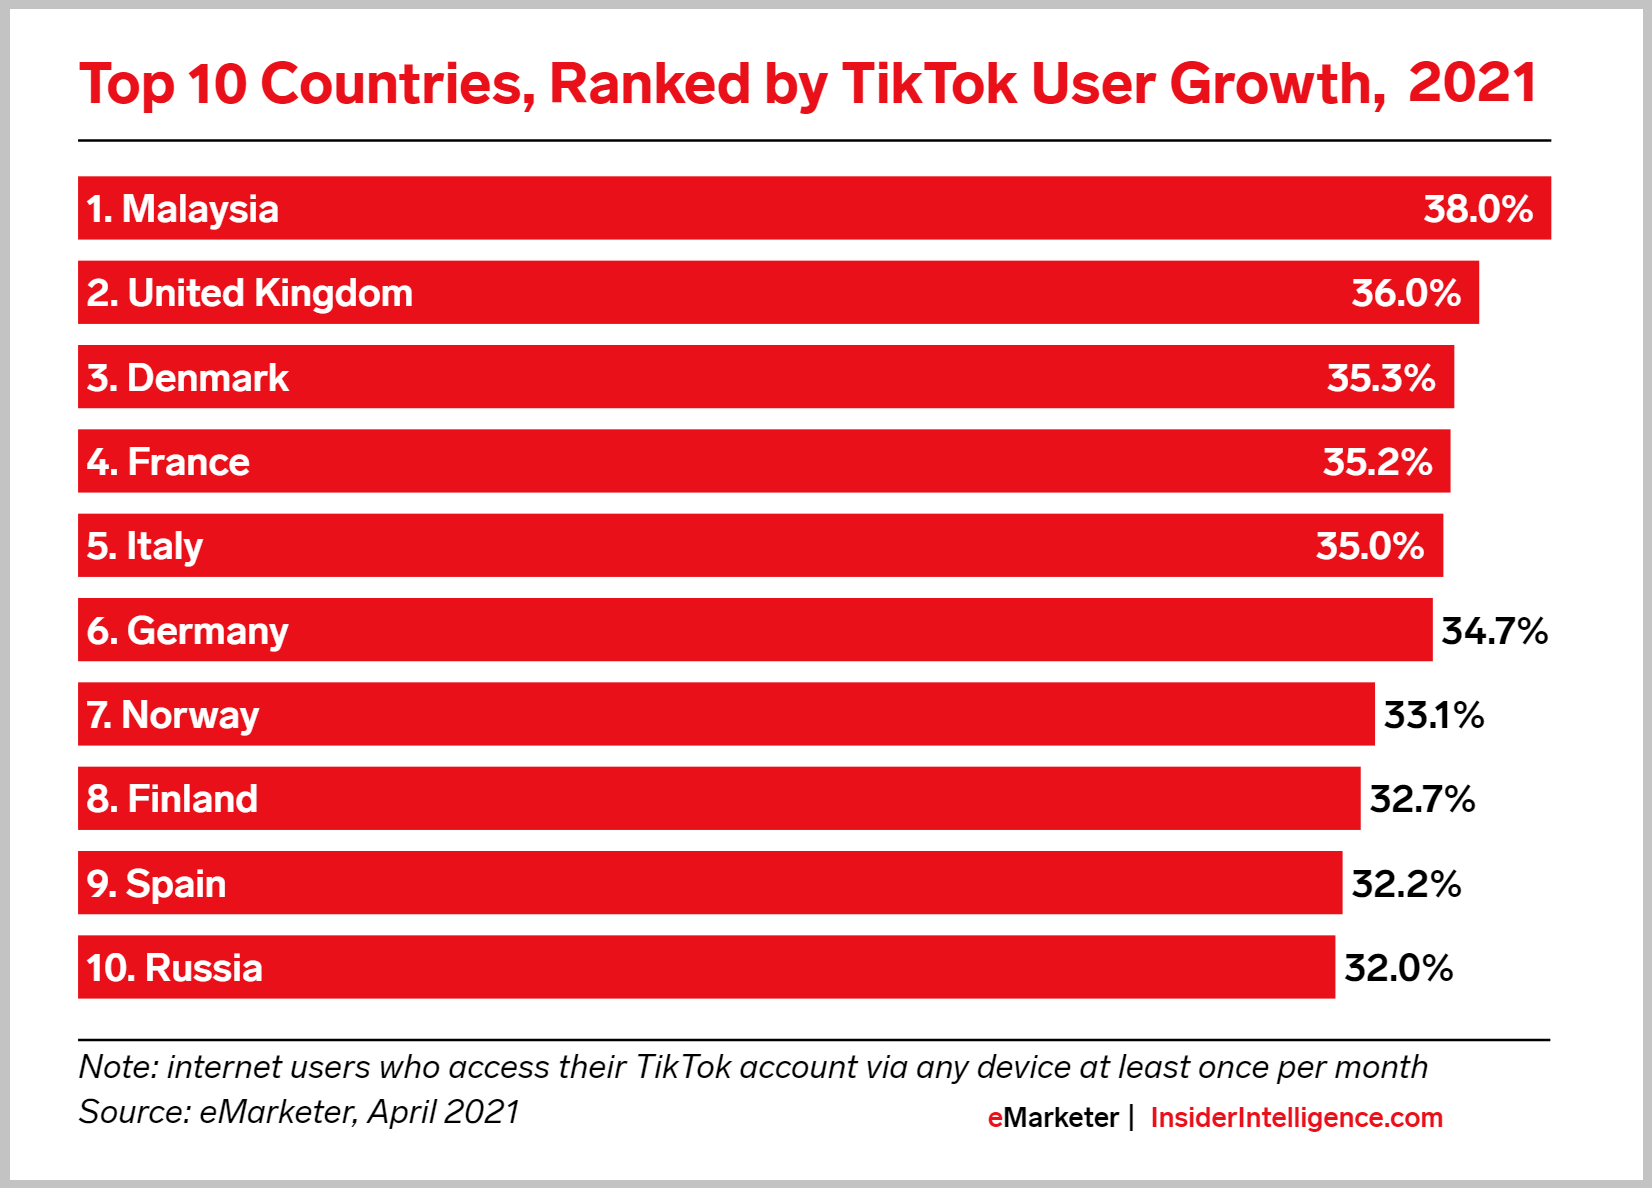 A Research Conducted By eMarketer Highlights The Future Of TikTok With This Top 10 Countries List